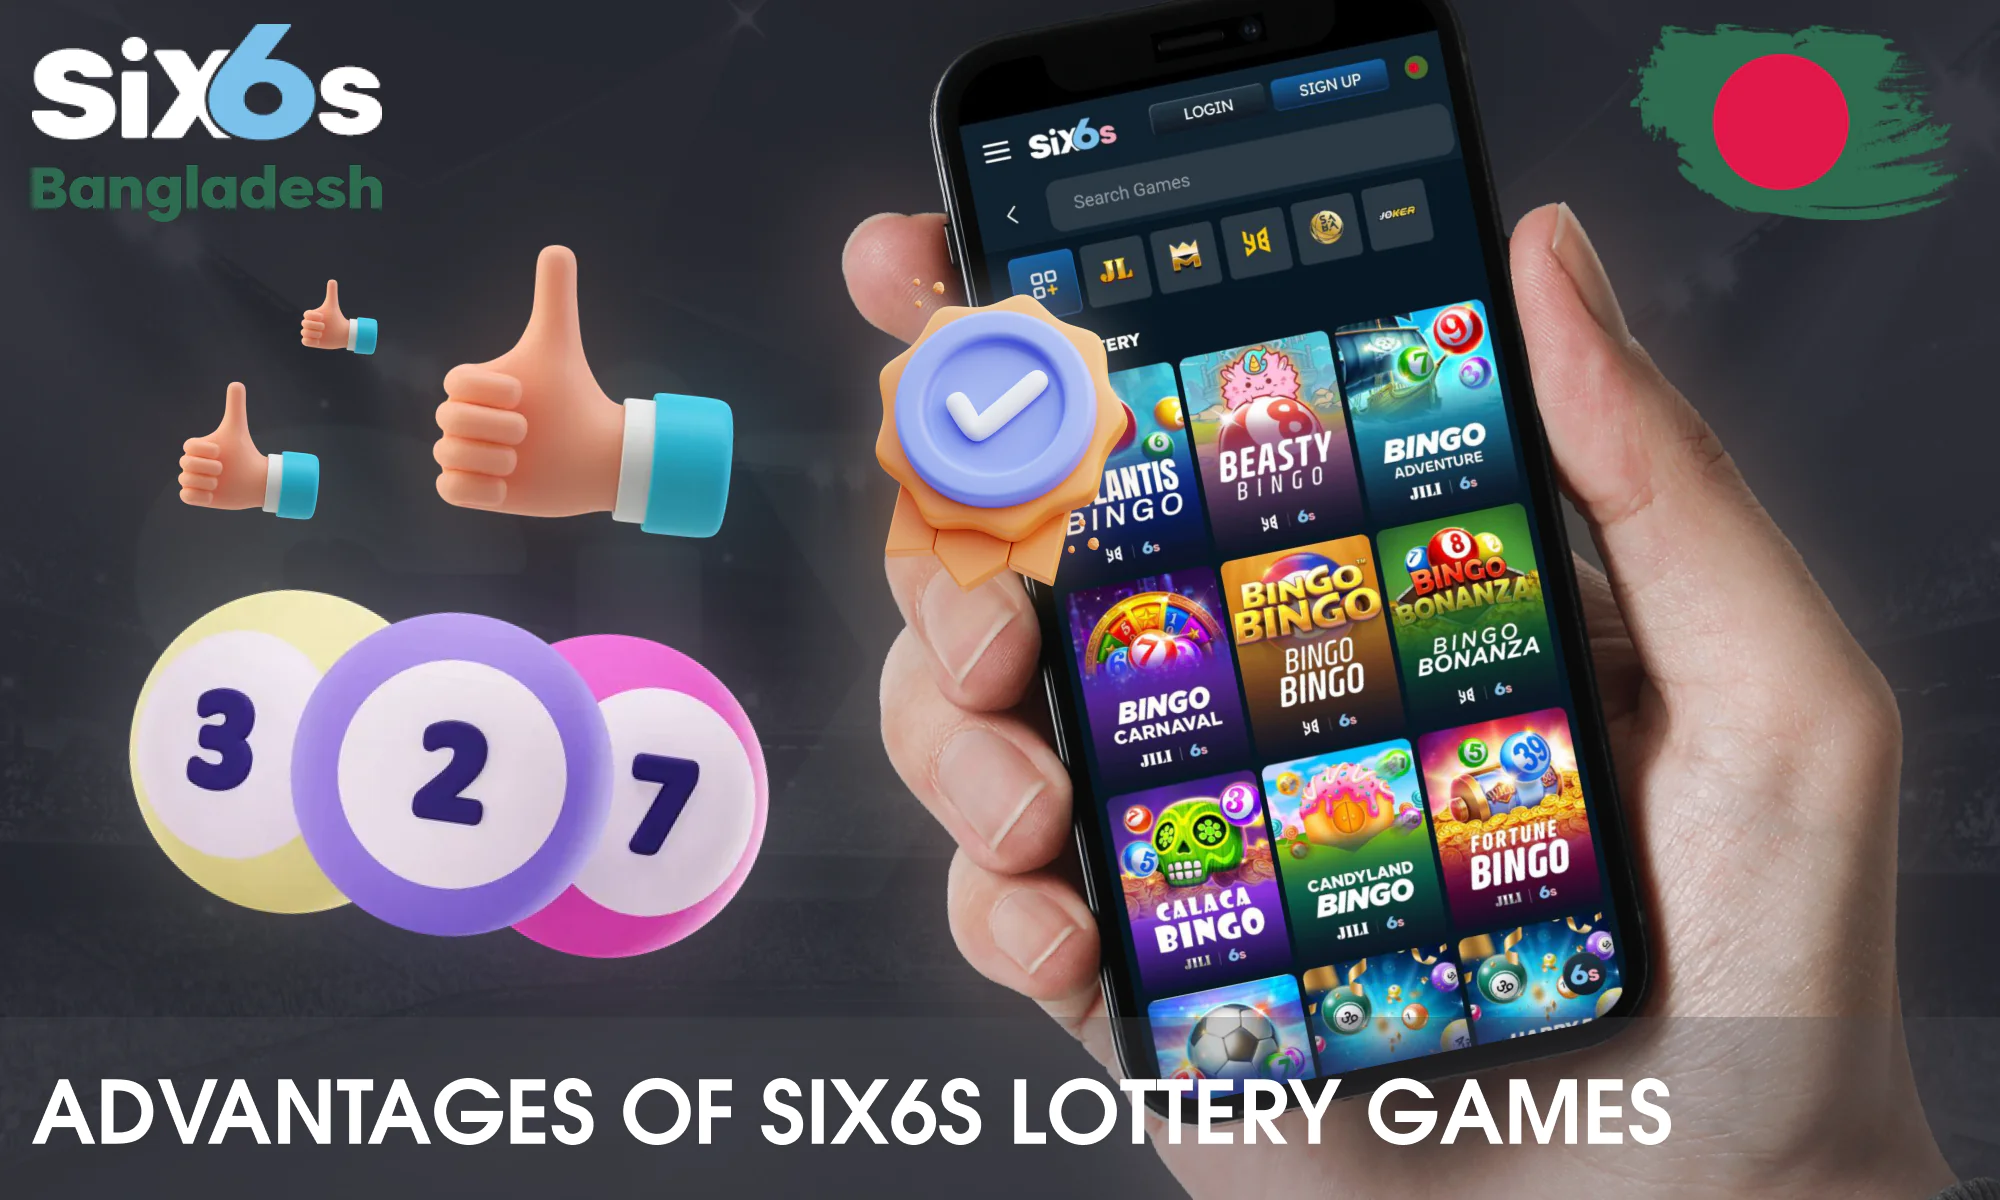 Advantages of Six6s Lottery games for Bangladeshi users